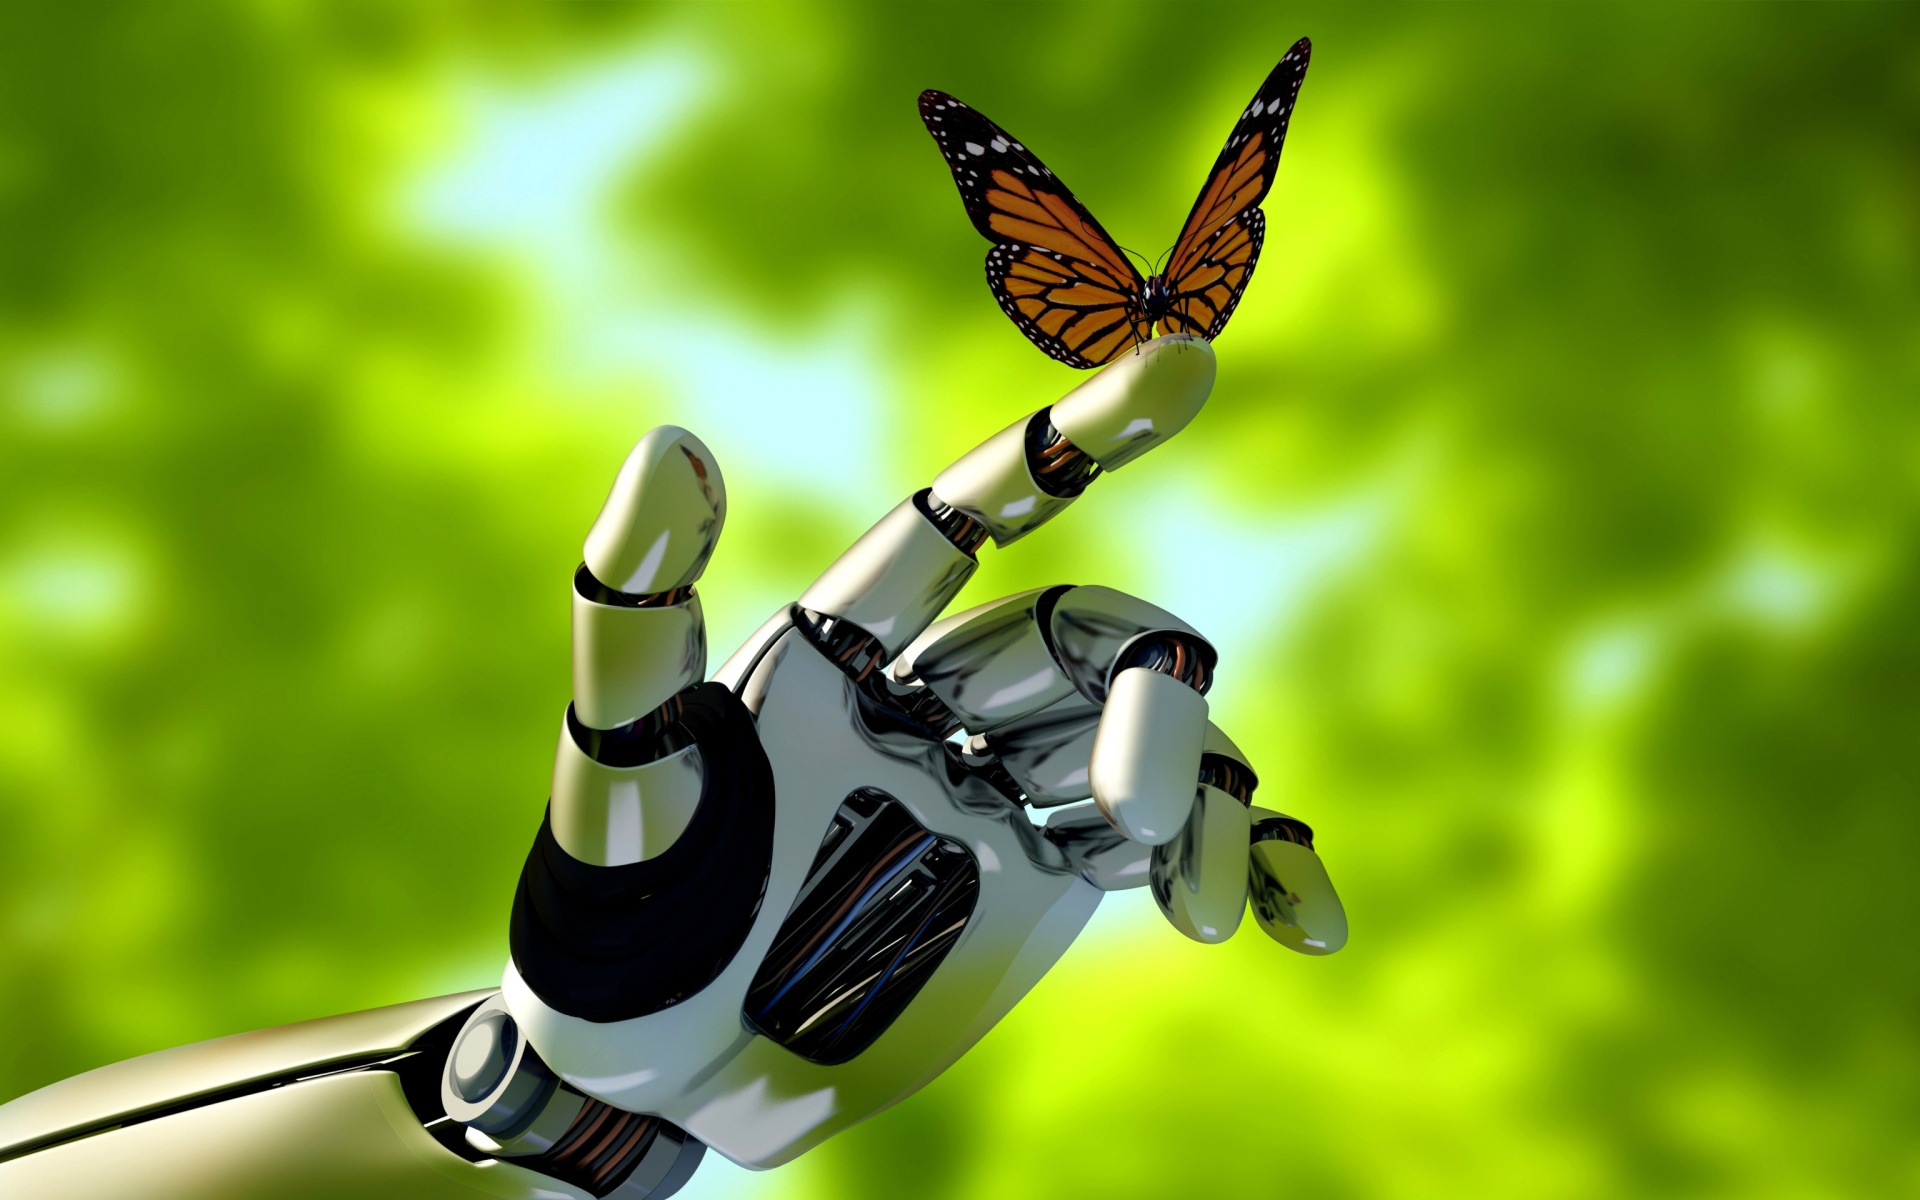 Robot hand and butterfly wallpaper 1920x1200